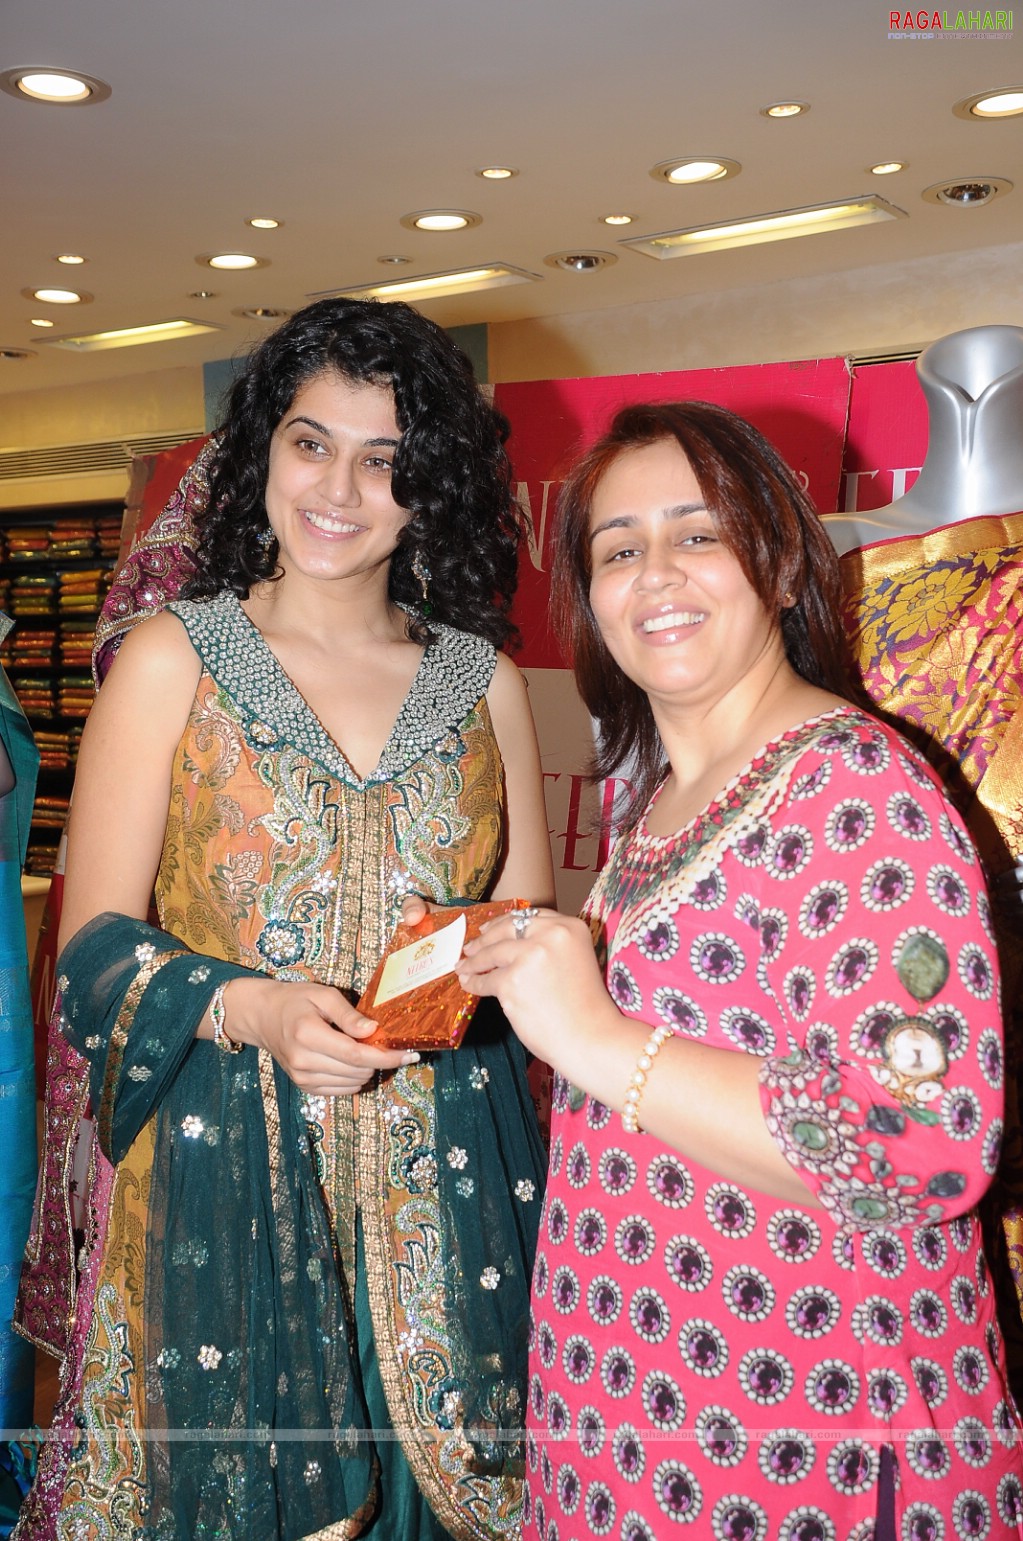 New Bridal Collection Launch at Neeru's by Taapsee